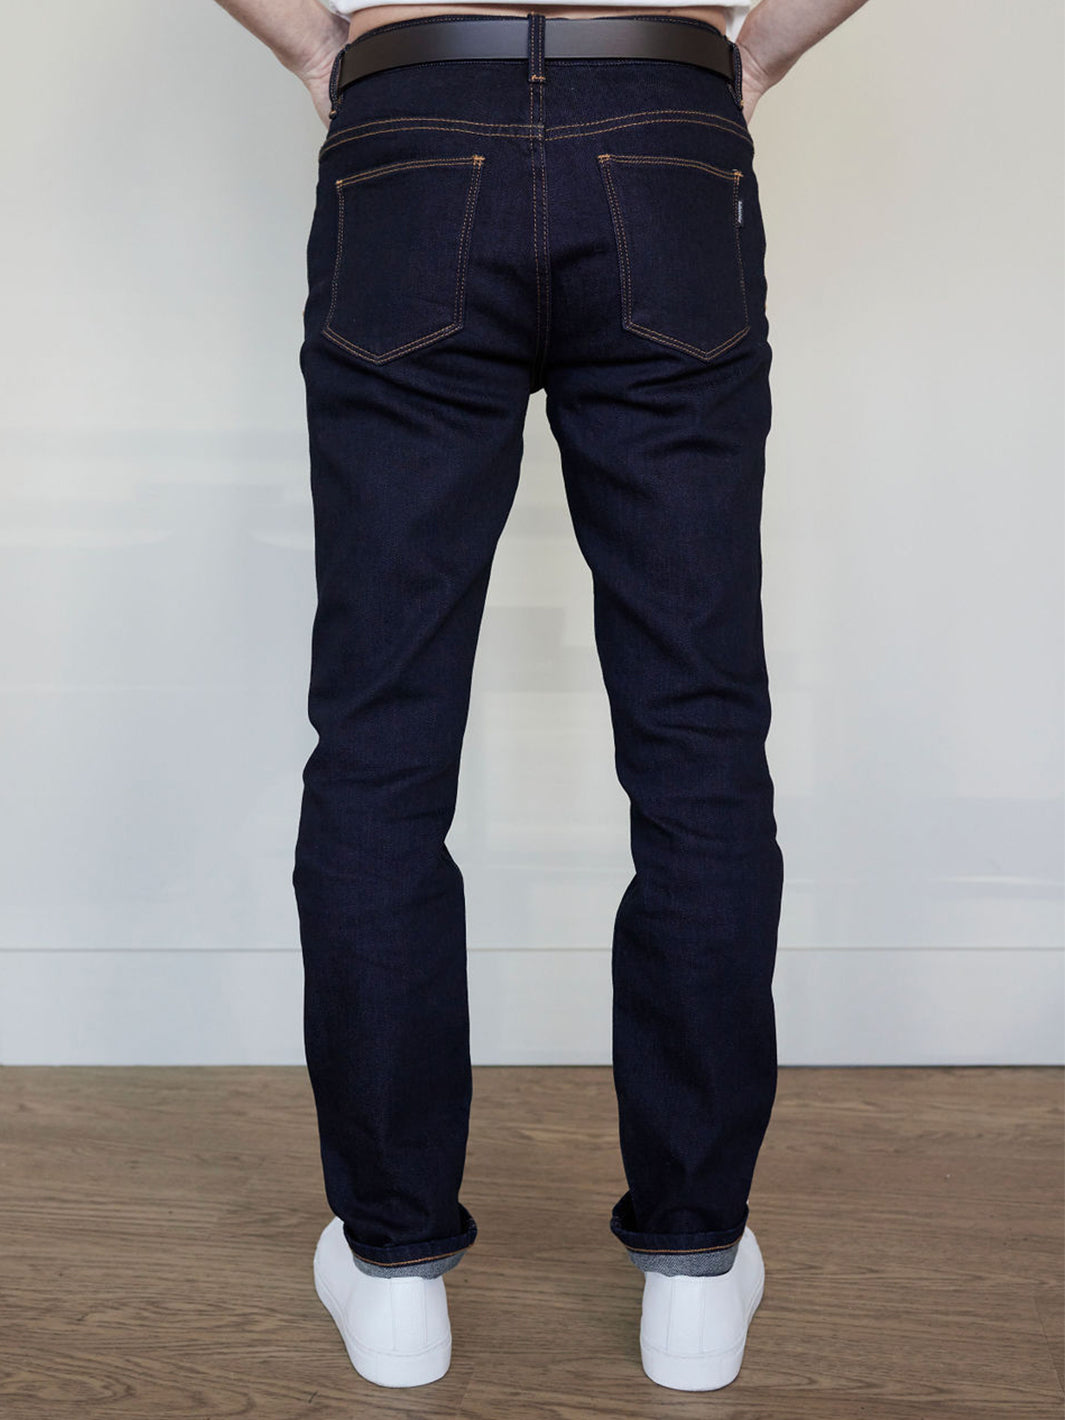 The Asuwere Jean - Rinse Wash Navy